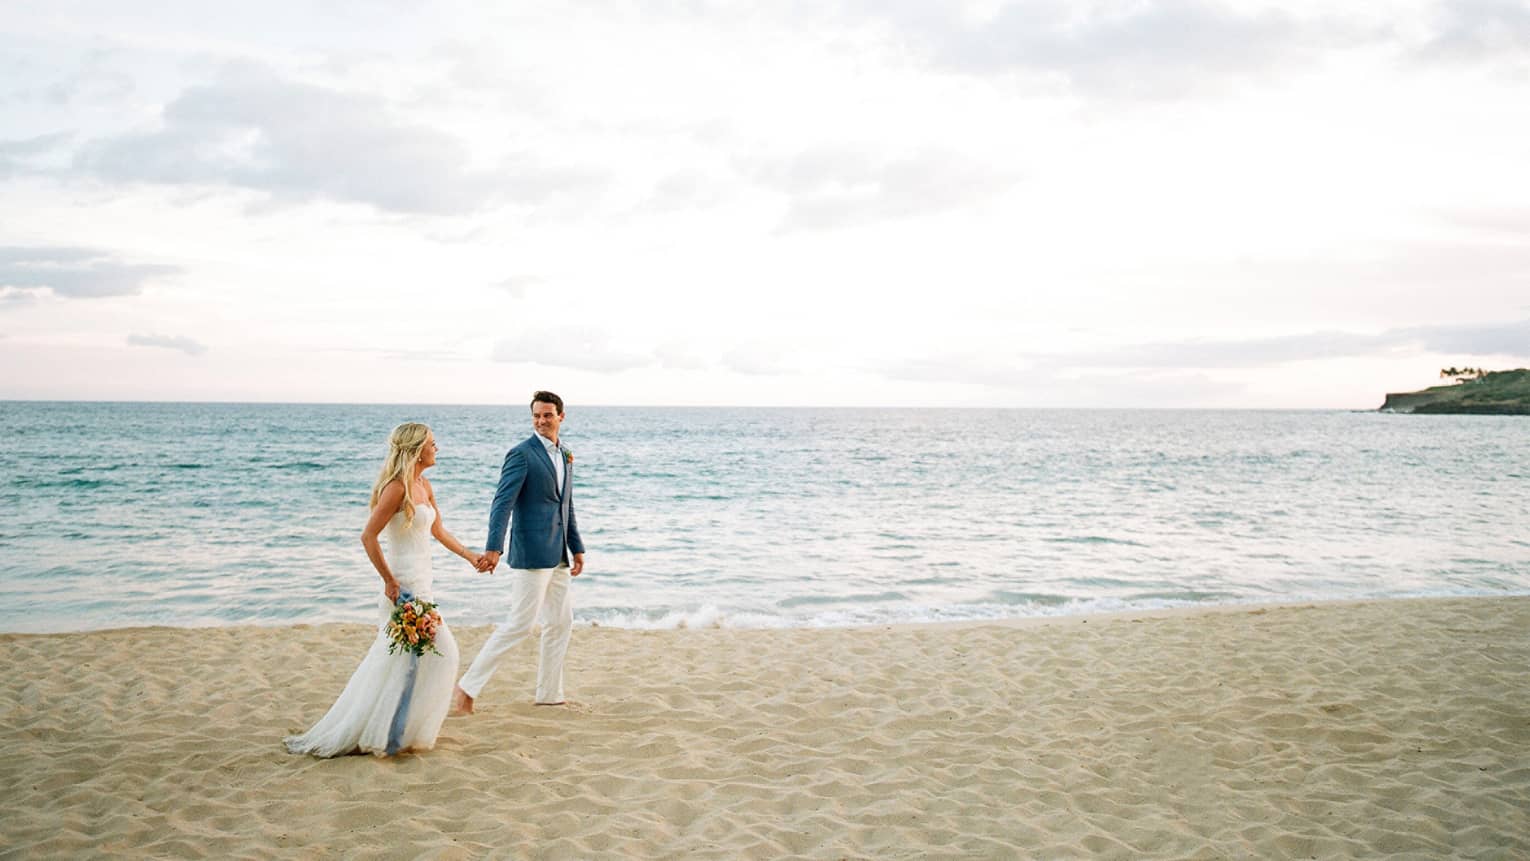 A groom is holding a brides hand as they walk along a beach.